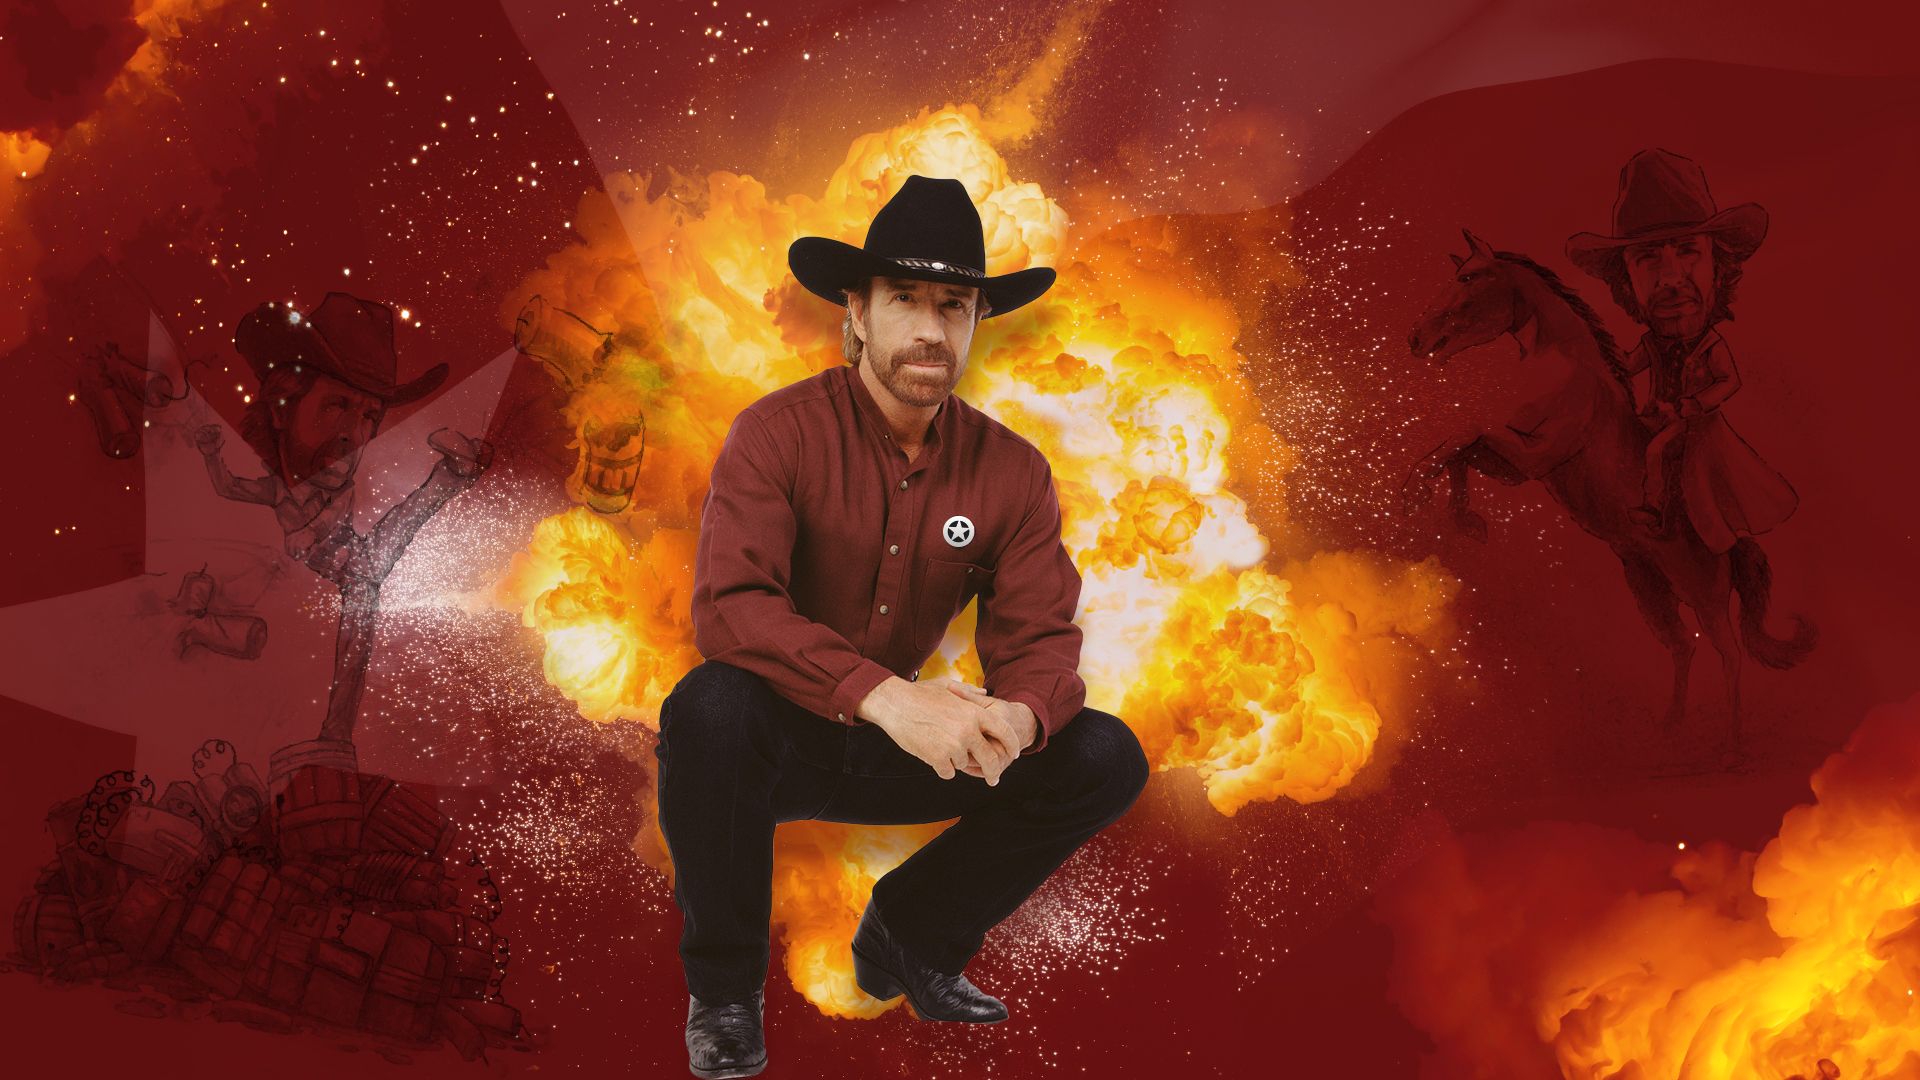 Dress up as Chuck Norris, then Run with the Man Himself